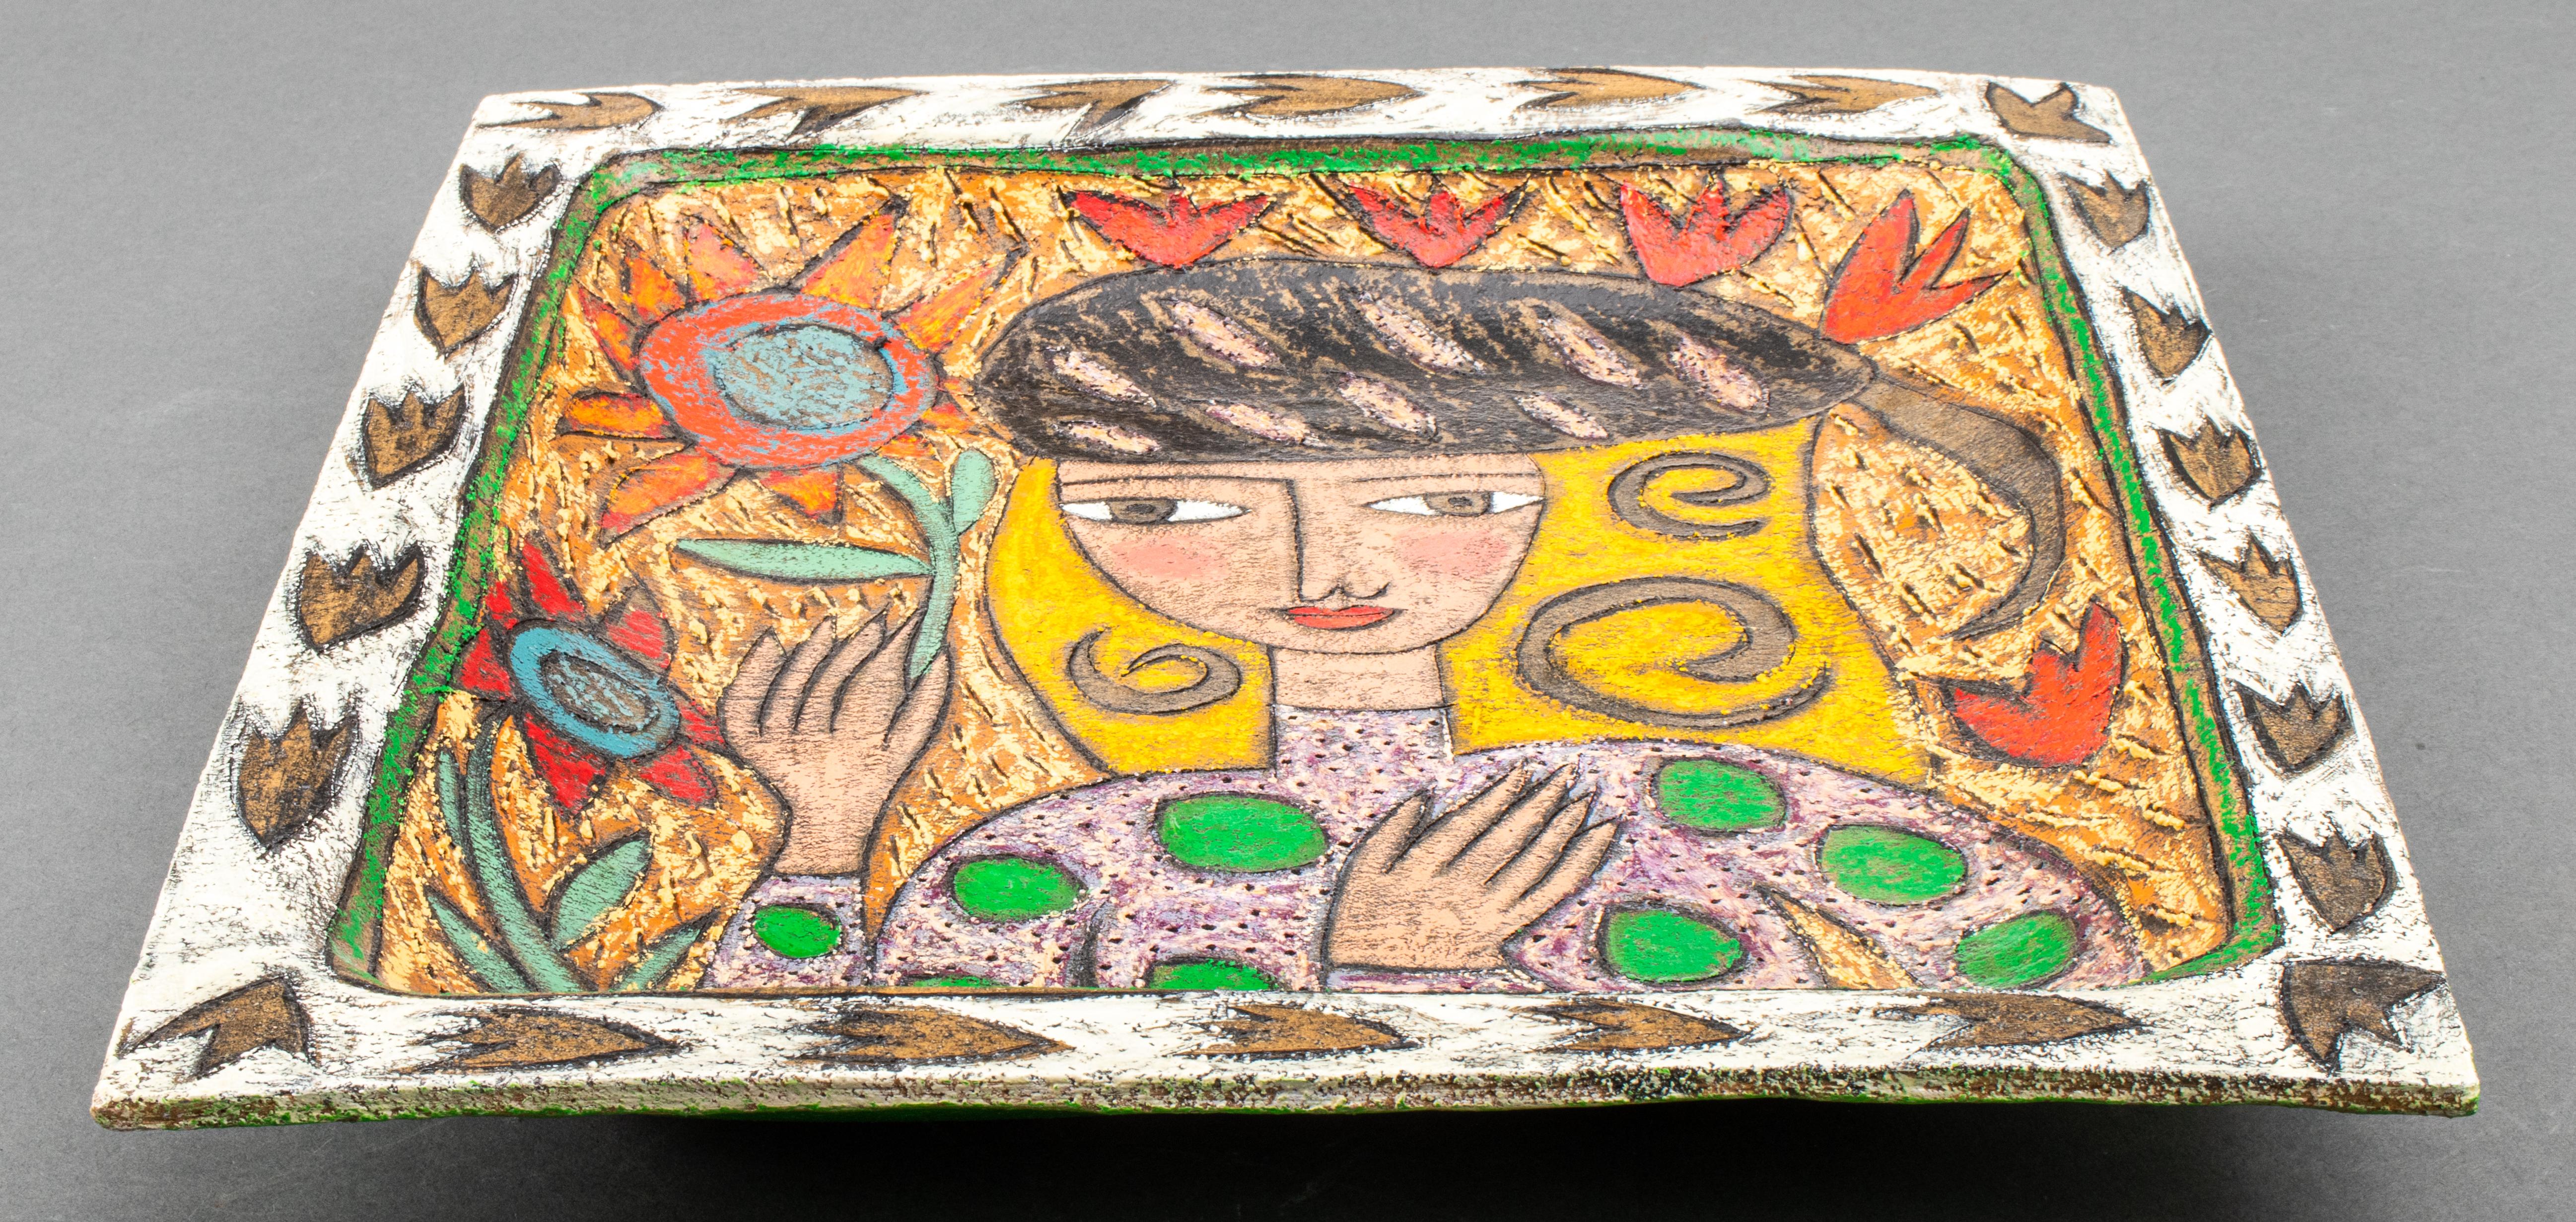 Rebecca cool and Ross Miller (Australian, XX-XXI) ceramic pottery platter with incised and hand-painted folk art decoration depicting a blond woman wearing a hat and holding a sunflower, signed 